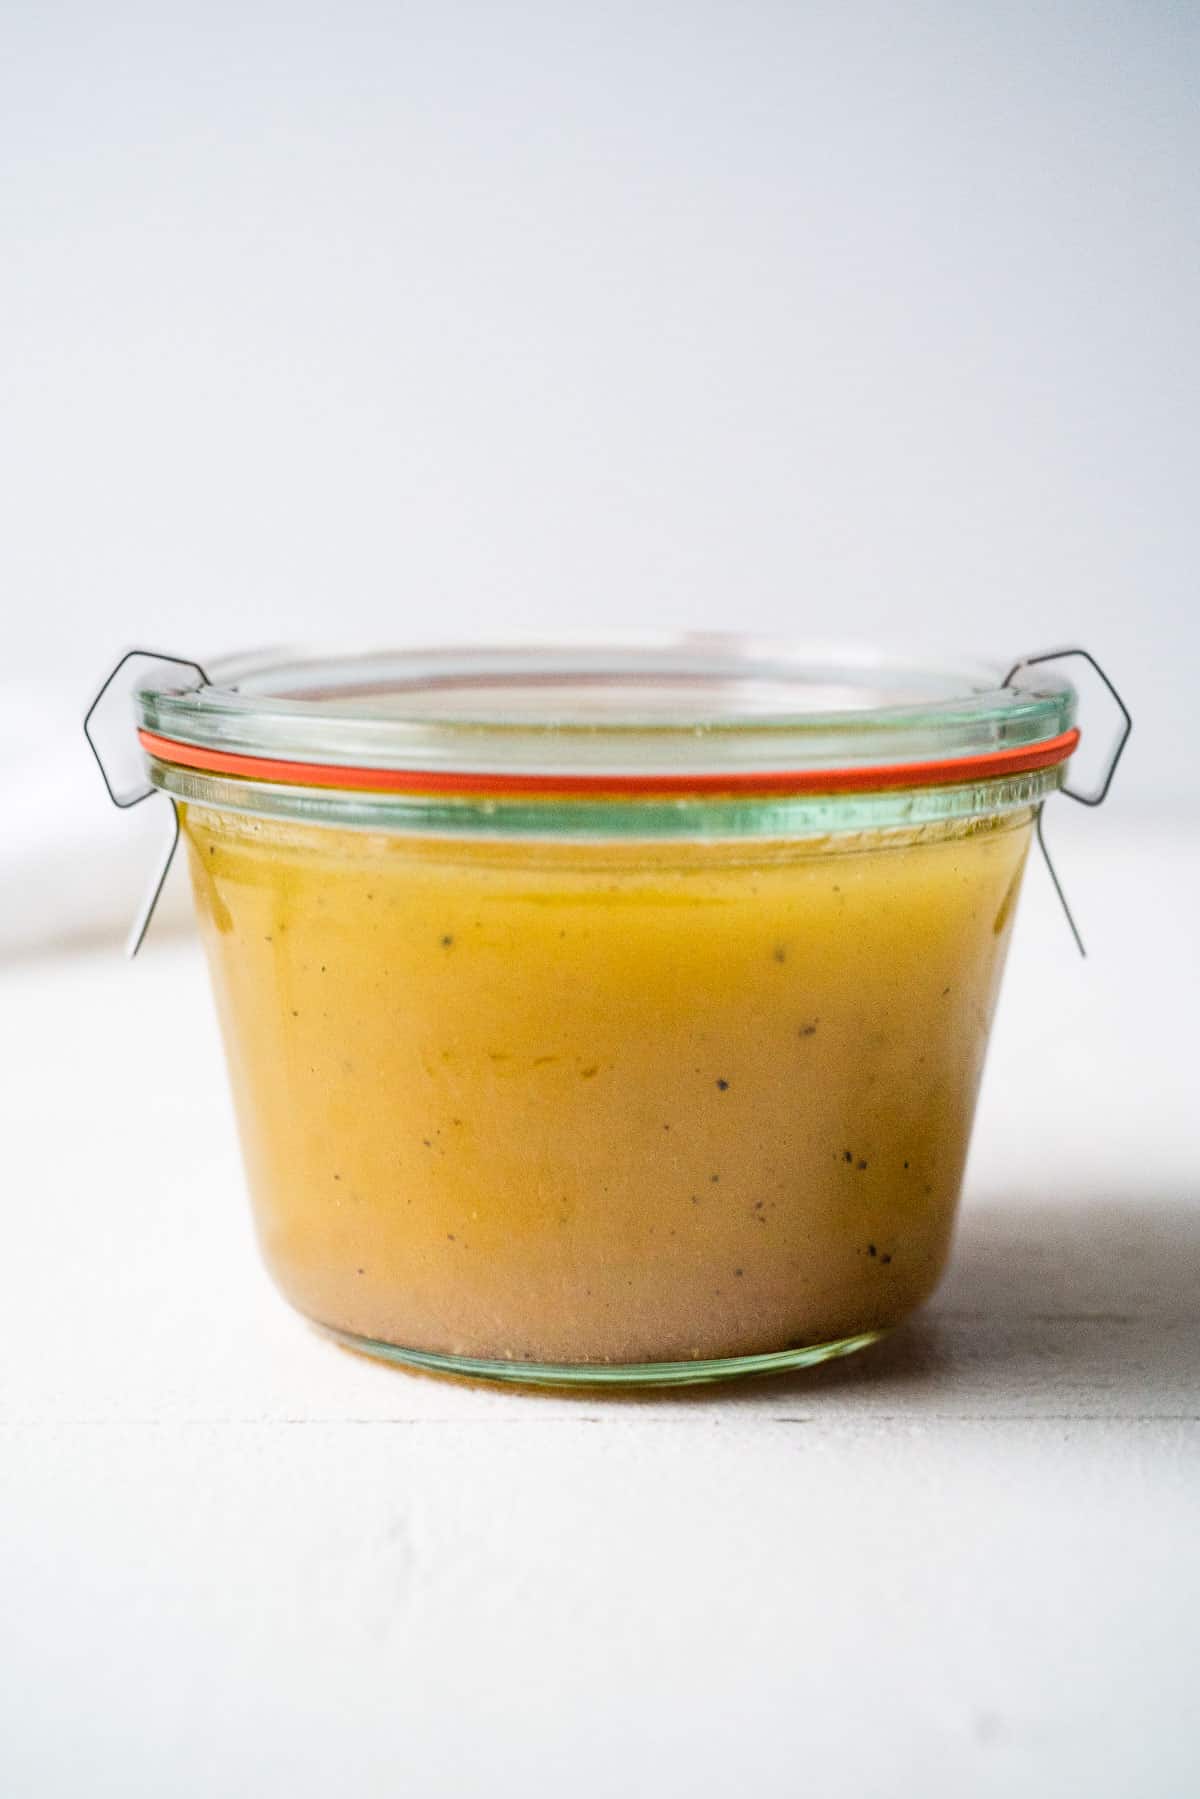 A glass weck jar filled with white balsamic vinaigrette.